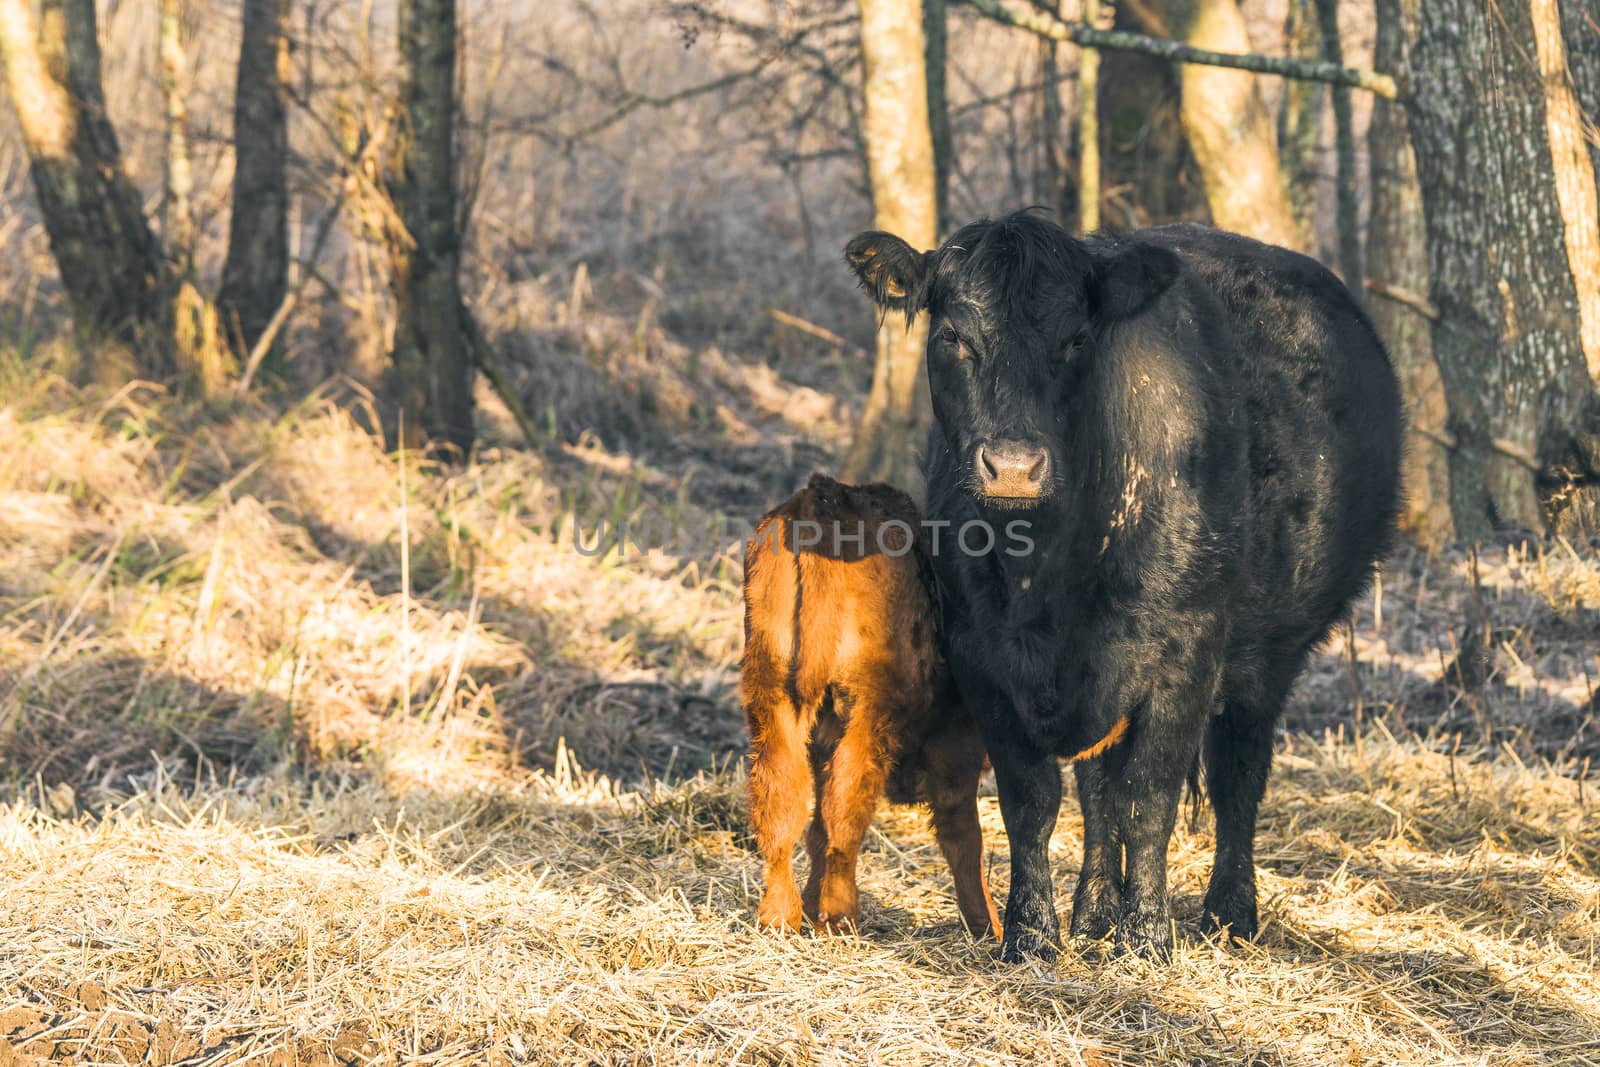 Calf with the mother cow near a forest with hay on the ground in the sun